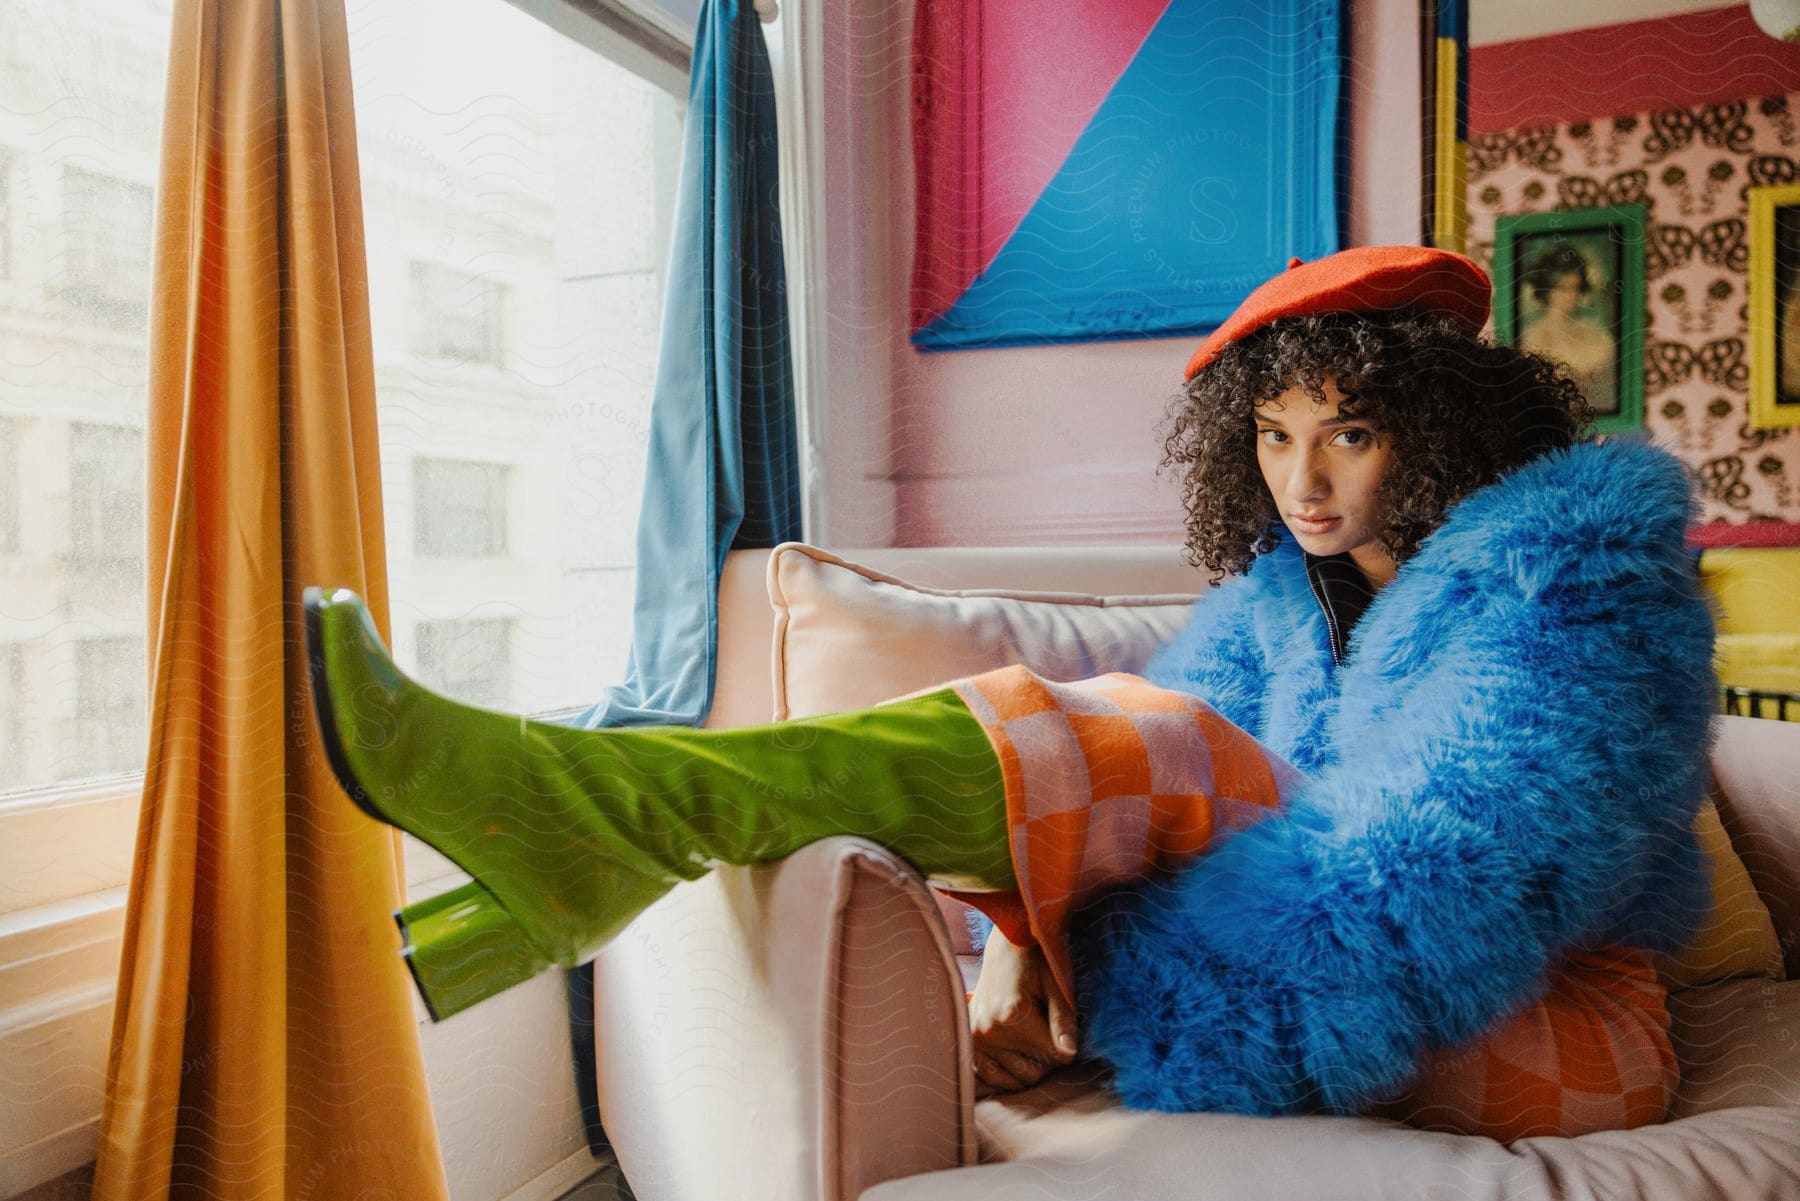 Woman sitting on a couch wearing a checkered dress and blue fur coat with chartreuse green boots and her foot up on the end of the couch